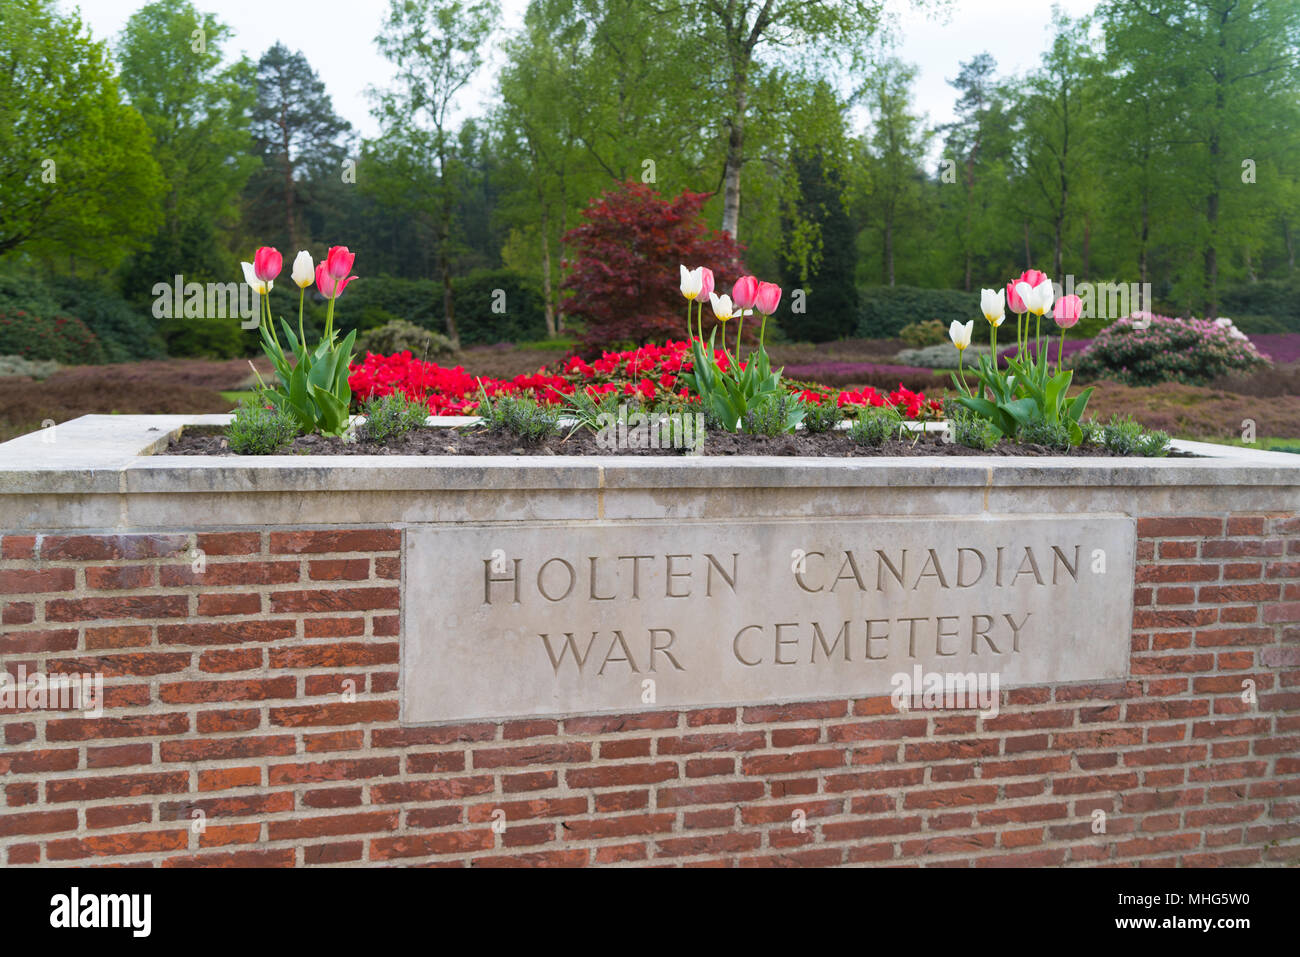 HOLTEN, NETHERLANDS - APRIL 29, 2018: Details of the Holten canadian war cemetary, an officially piece of canadian territory in the netherlands Stock Photo